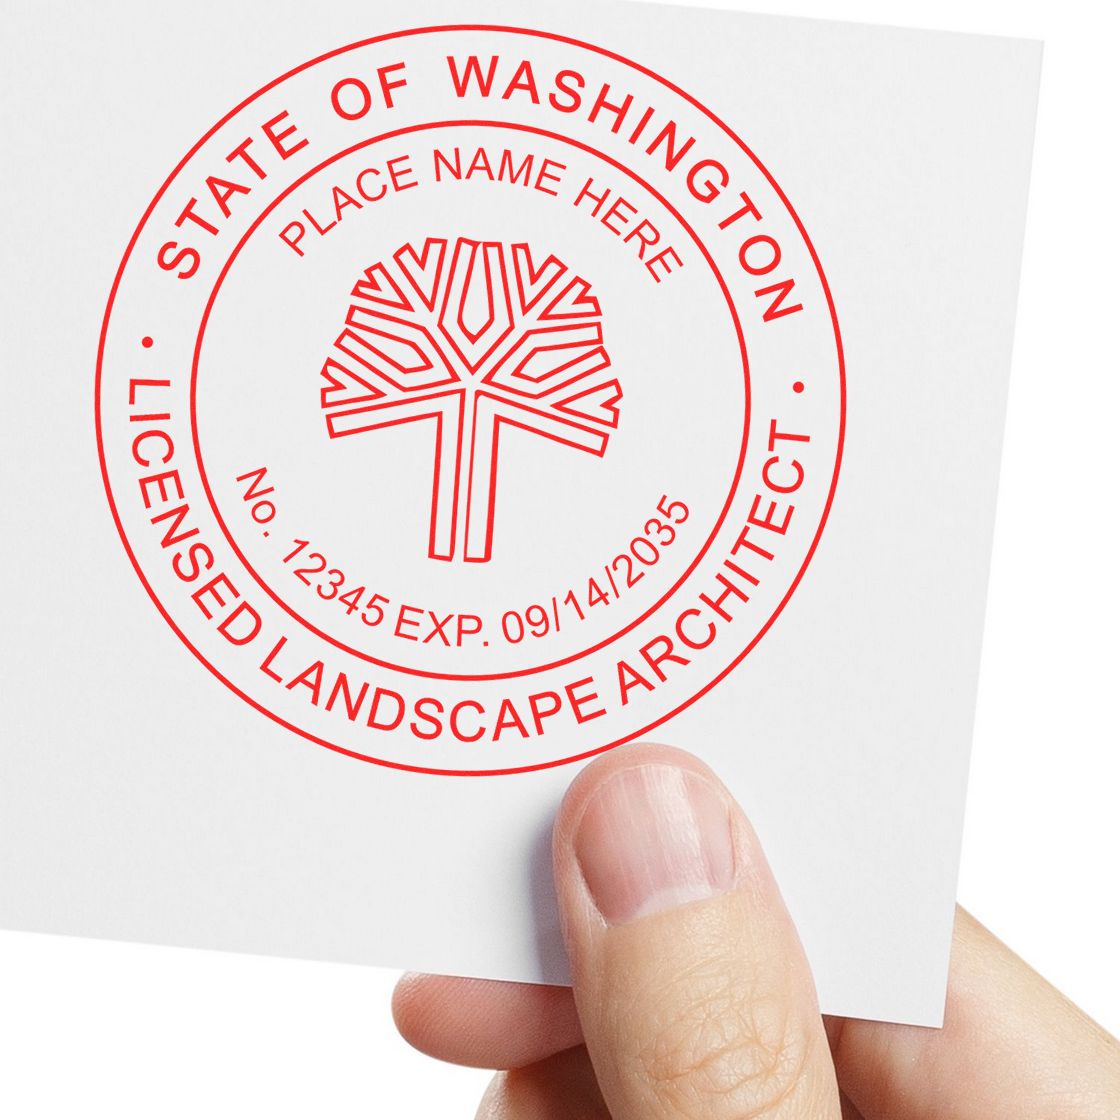 The main image for the Washington Landscape Architectural Seal Stamp depicting a sample of the imprint and electronic files